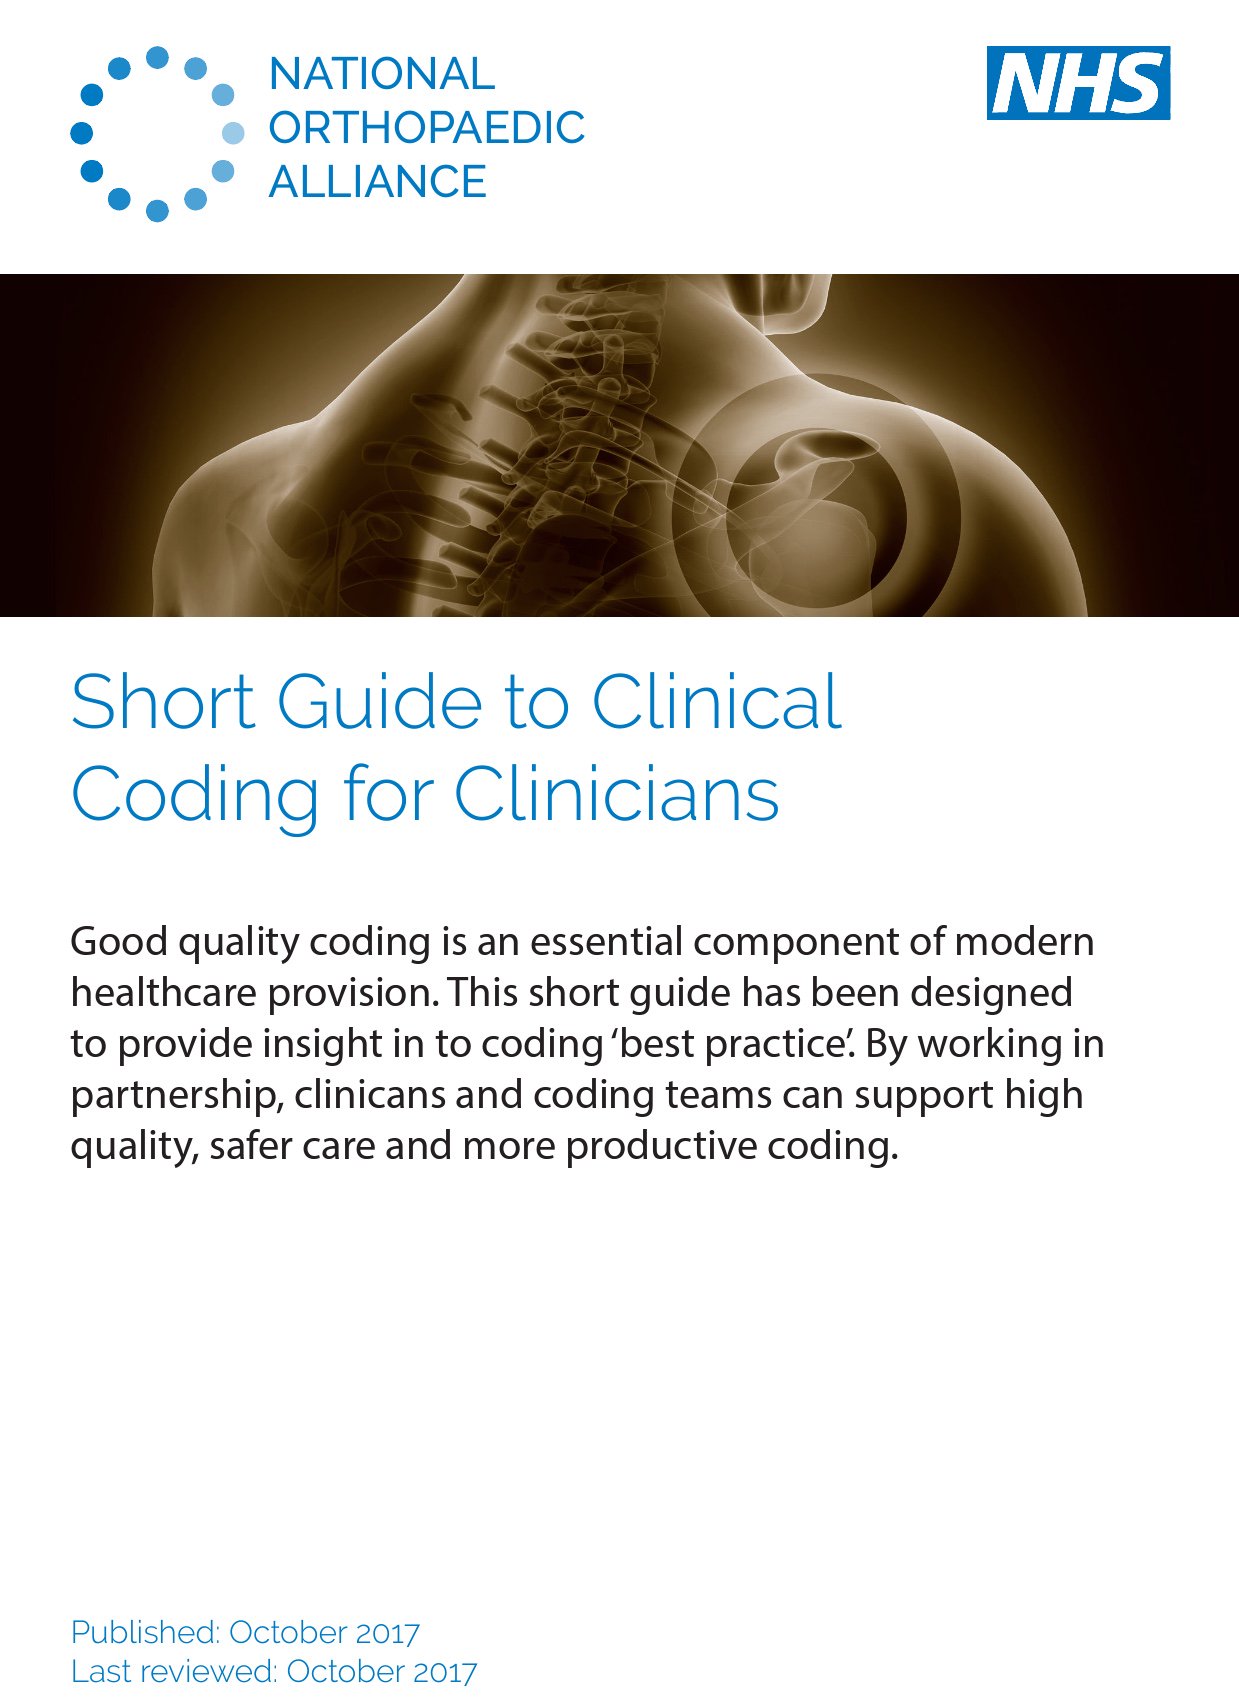 National Orthopaedic Alliance (NOA) vanguard publishes Short Guide to Clinical Coding for Clinicians featured image